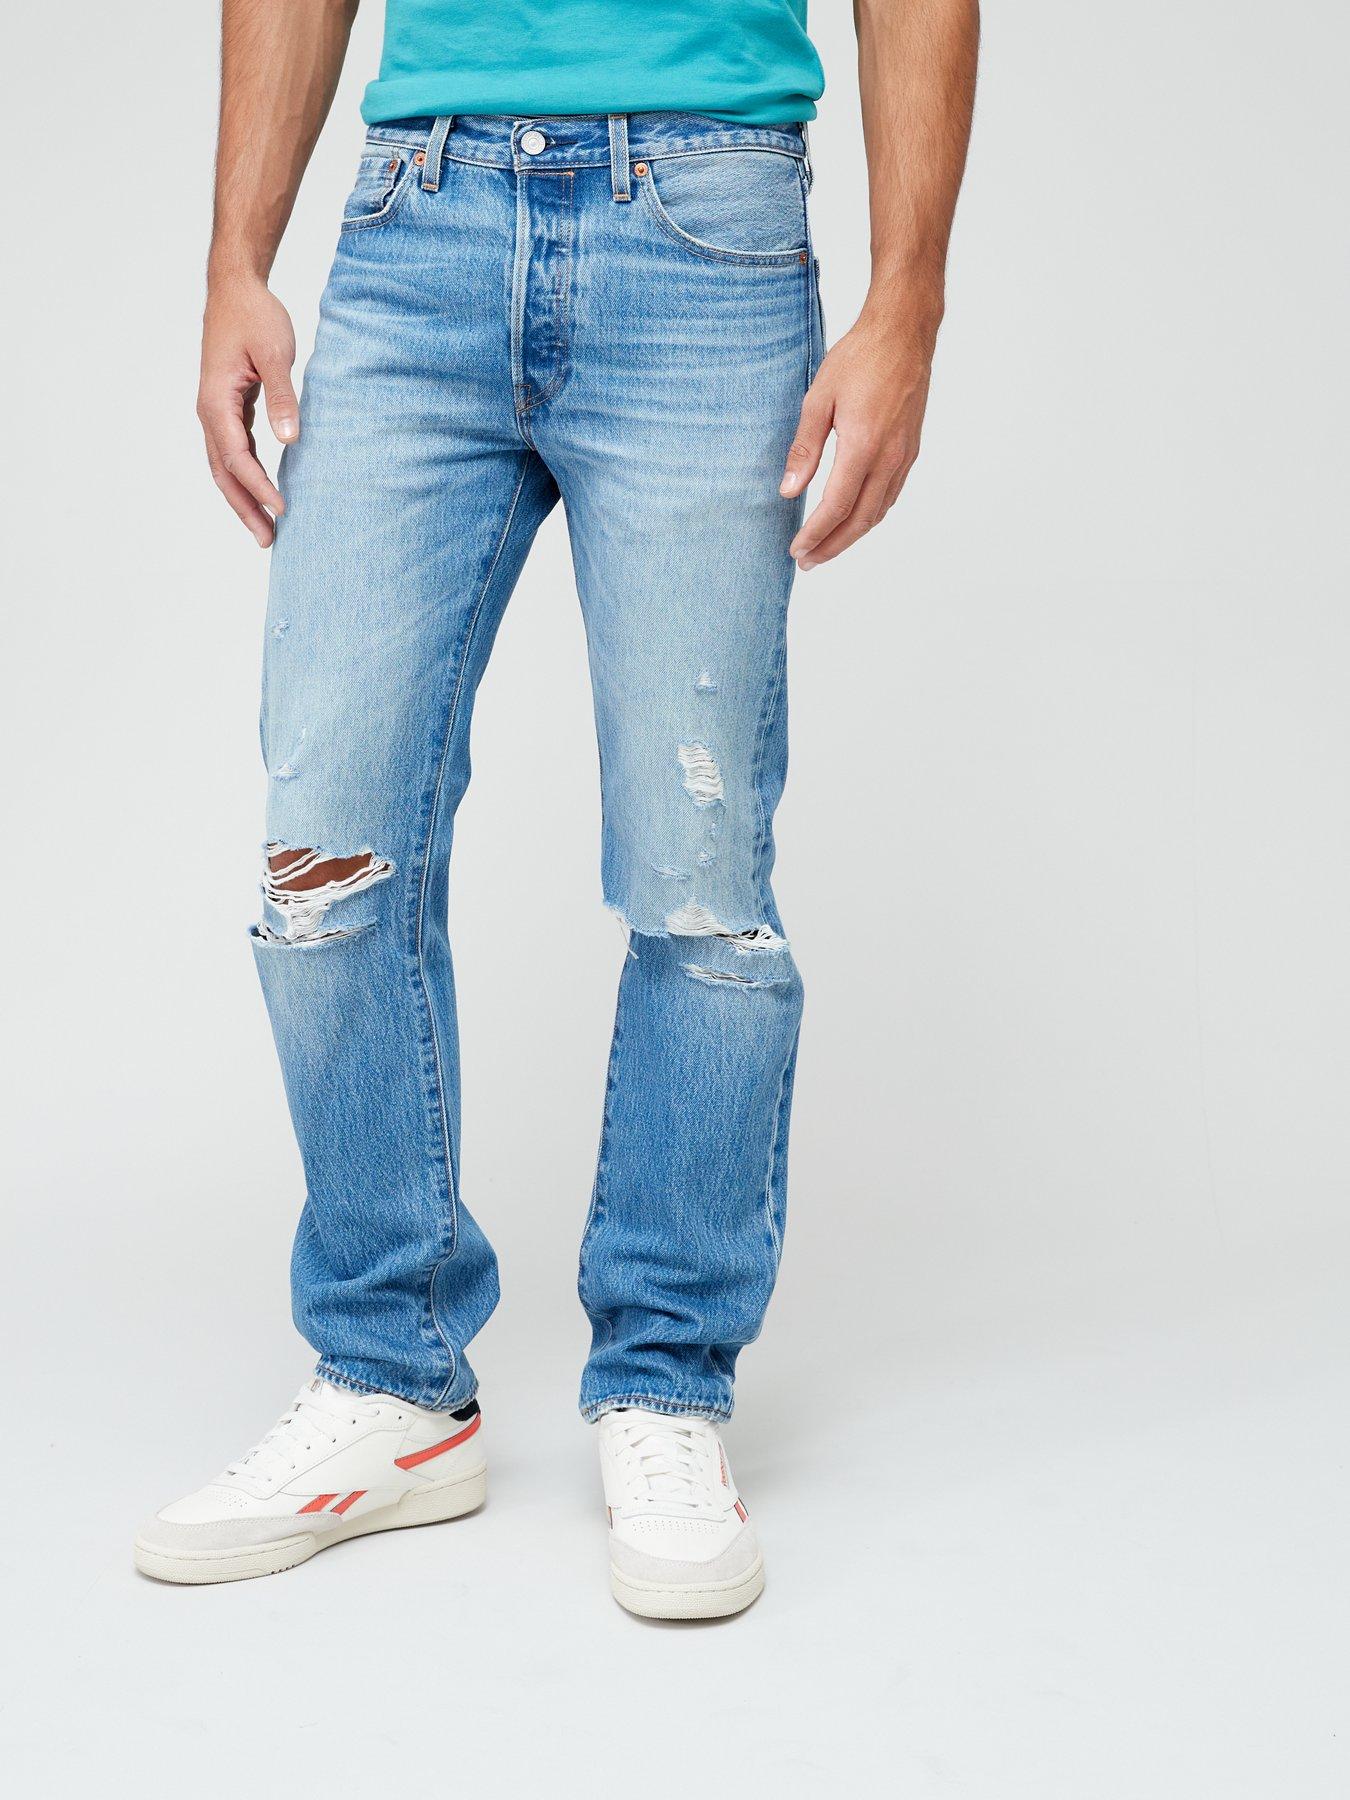 Levi's 501® Original Straight Fit Ripped Jeans - Light Wash 